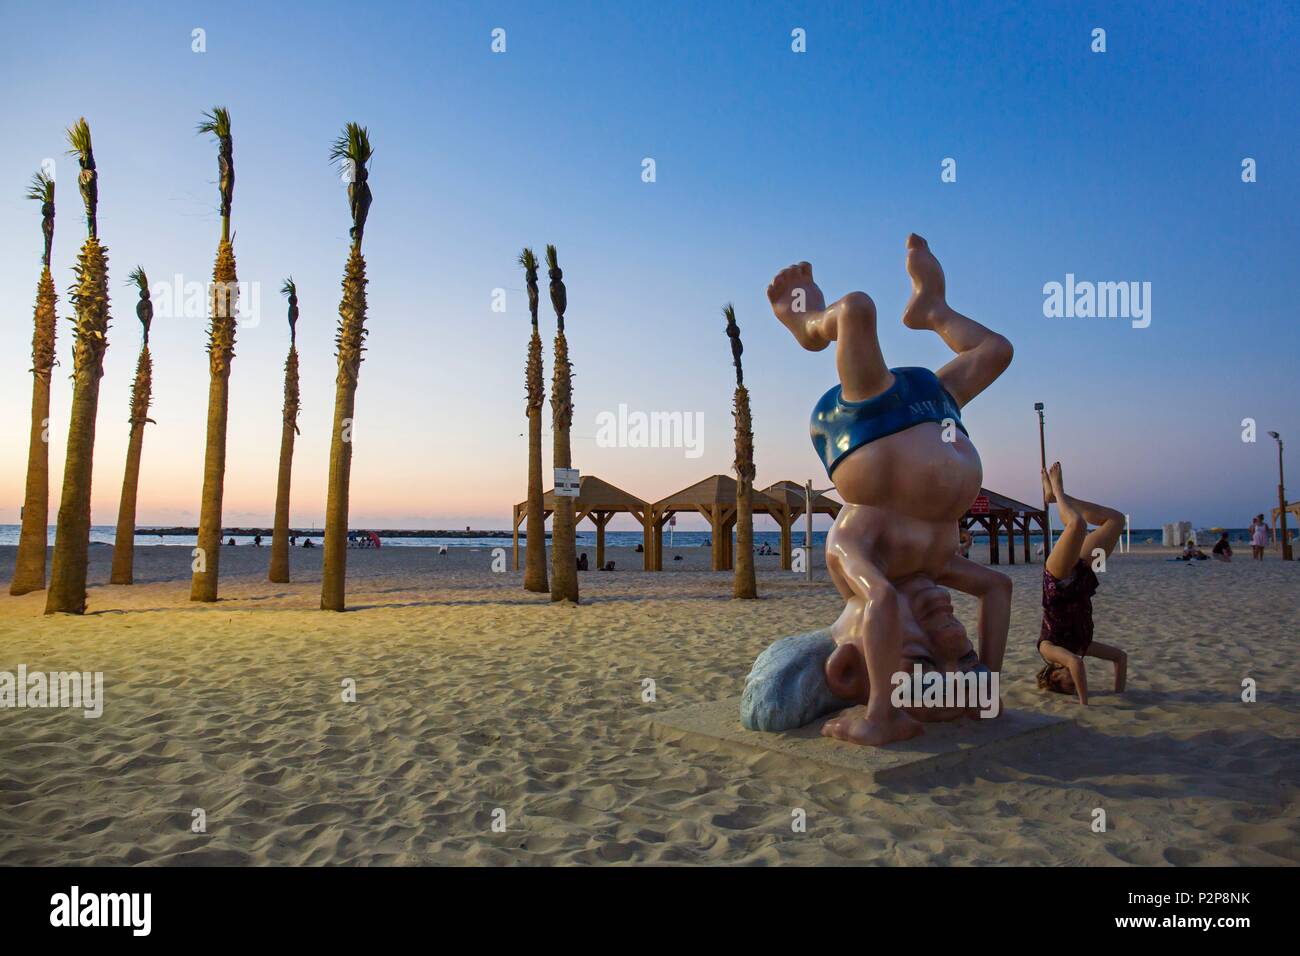 Israel, Tel Aviv, the seaside, the beach, the famous statue of the founder of the State of Israel David Ben Gurion to encourage tourists to visit the museum dedicated to him, the former Prime Minister doing a headstand reproducing a famous photo Stock Photo